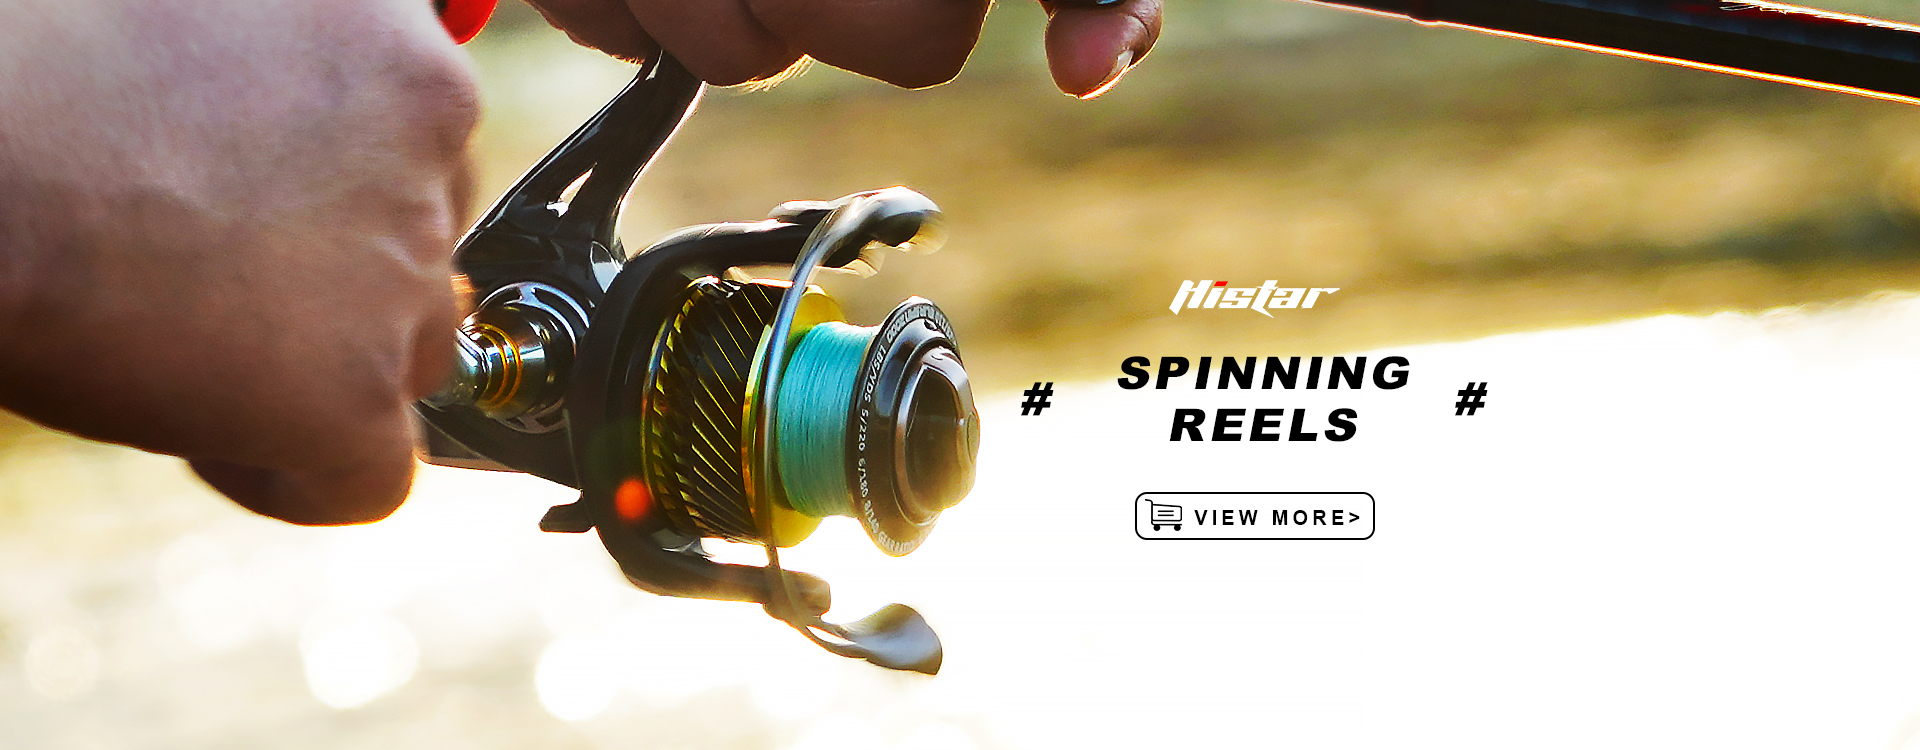 Histar Fishing Official Store - Amazing products with exclusive